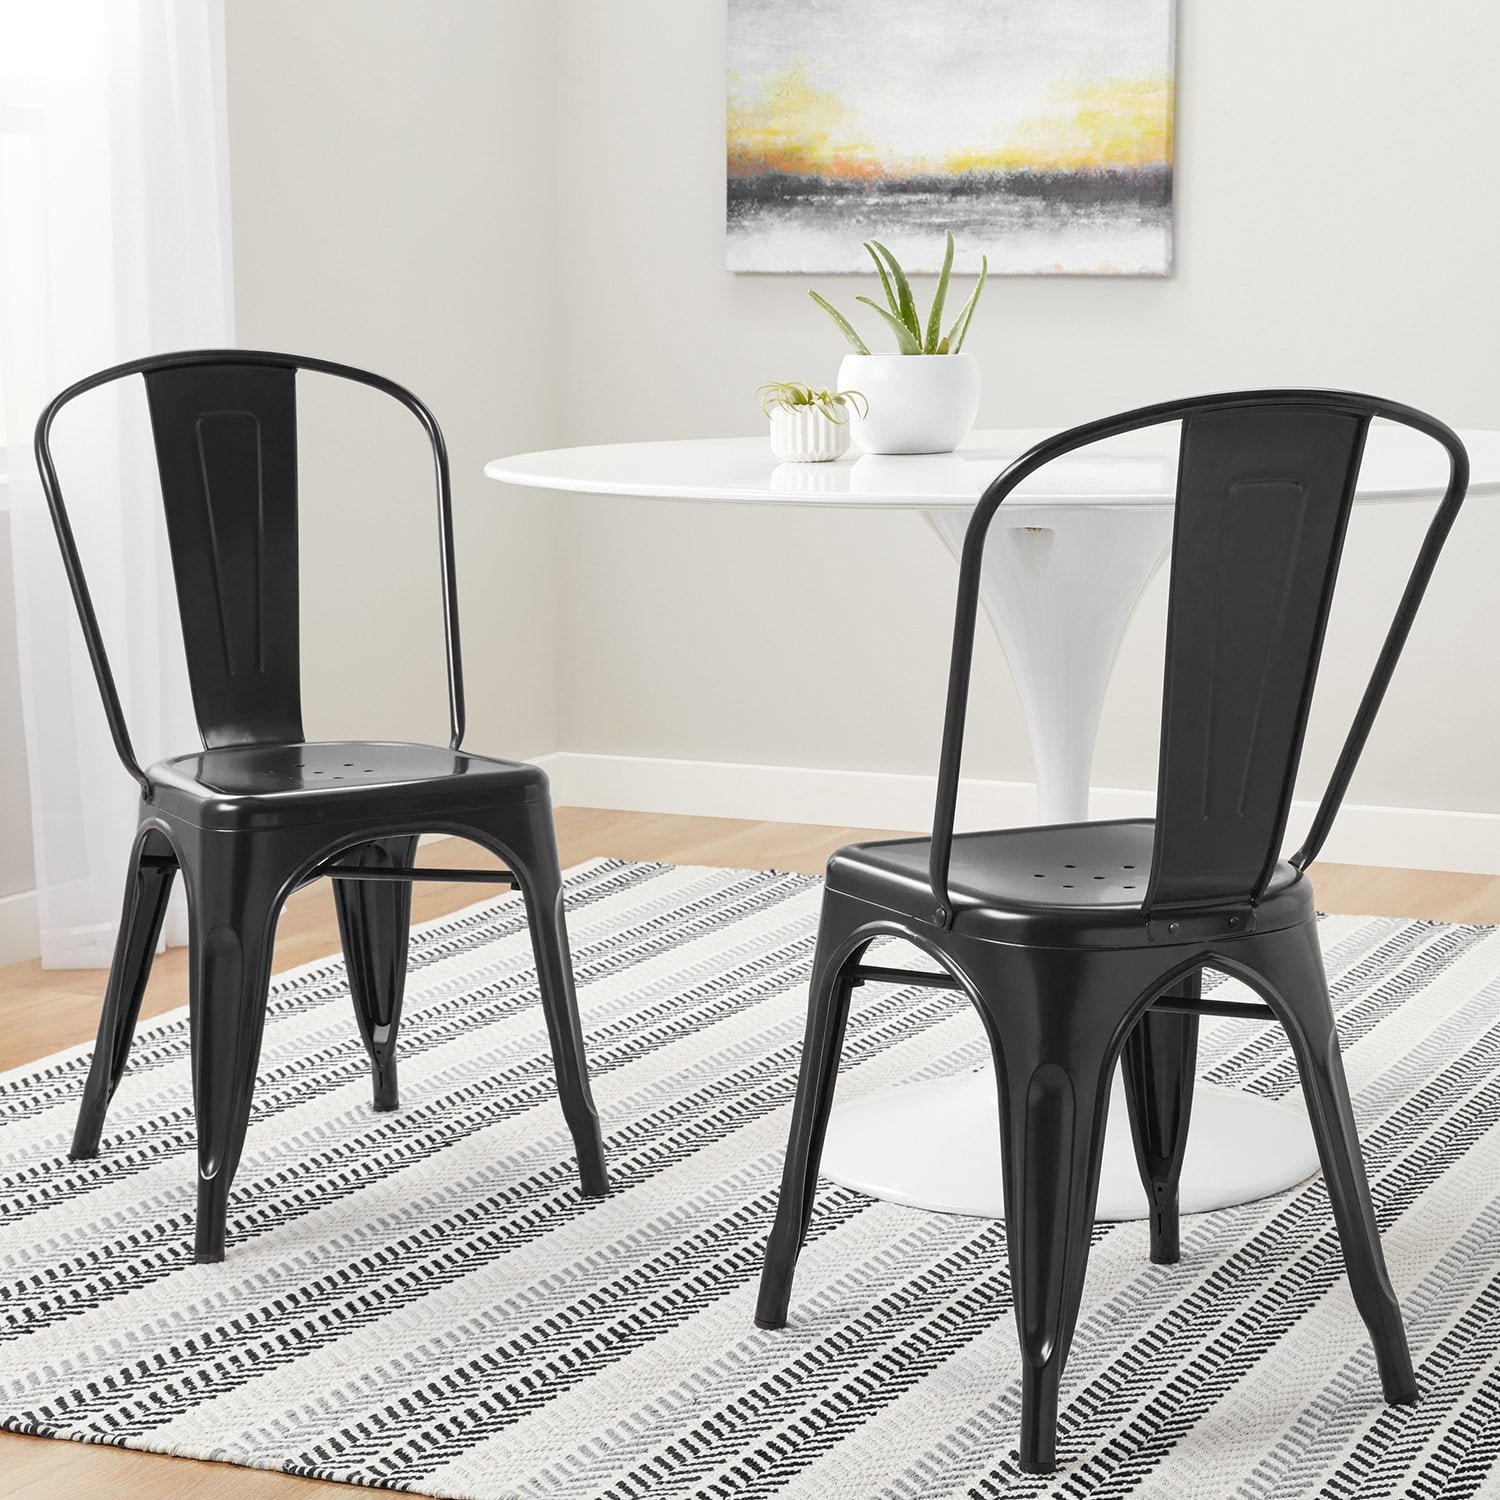 Metal Dining Chair Indoor Outdoor Use, How To Spray Paint Metal Dining Chairs